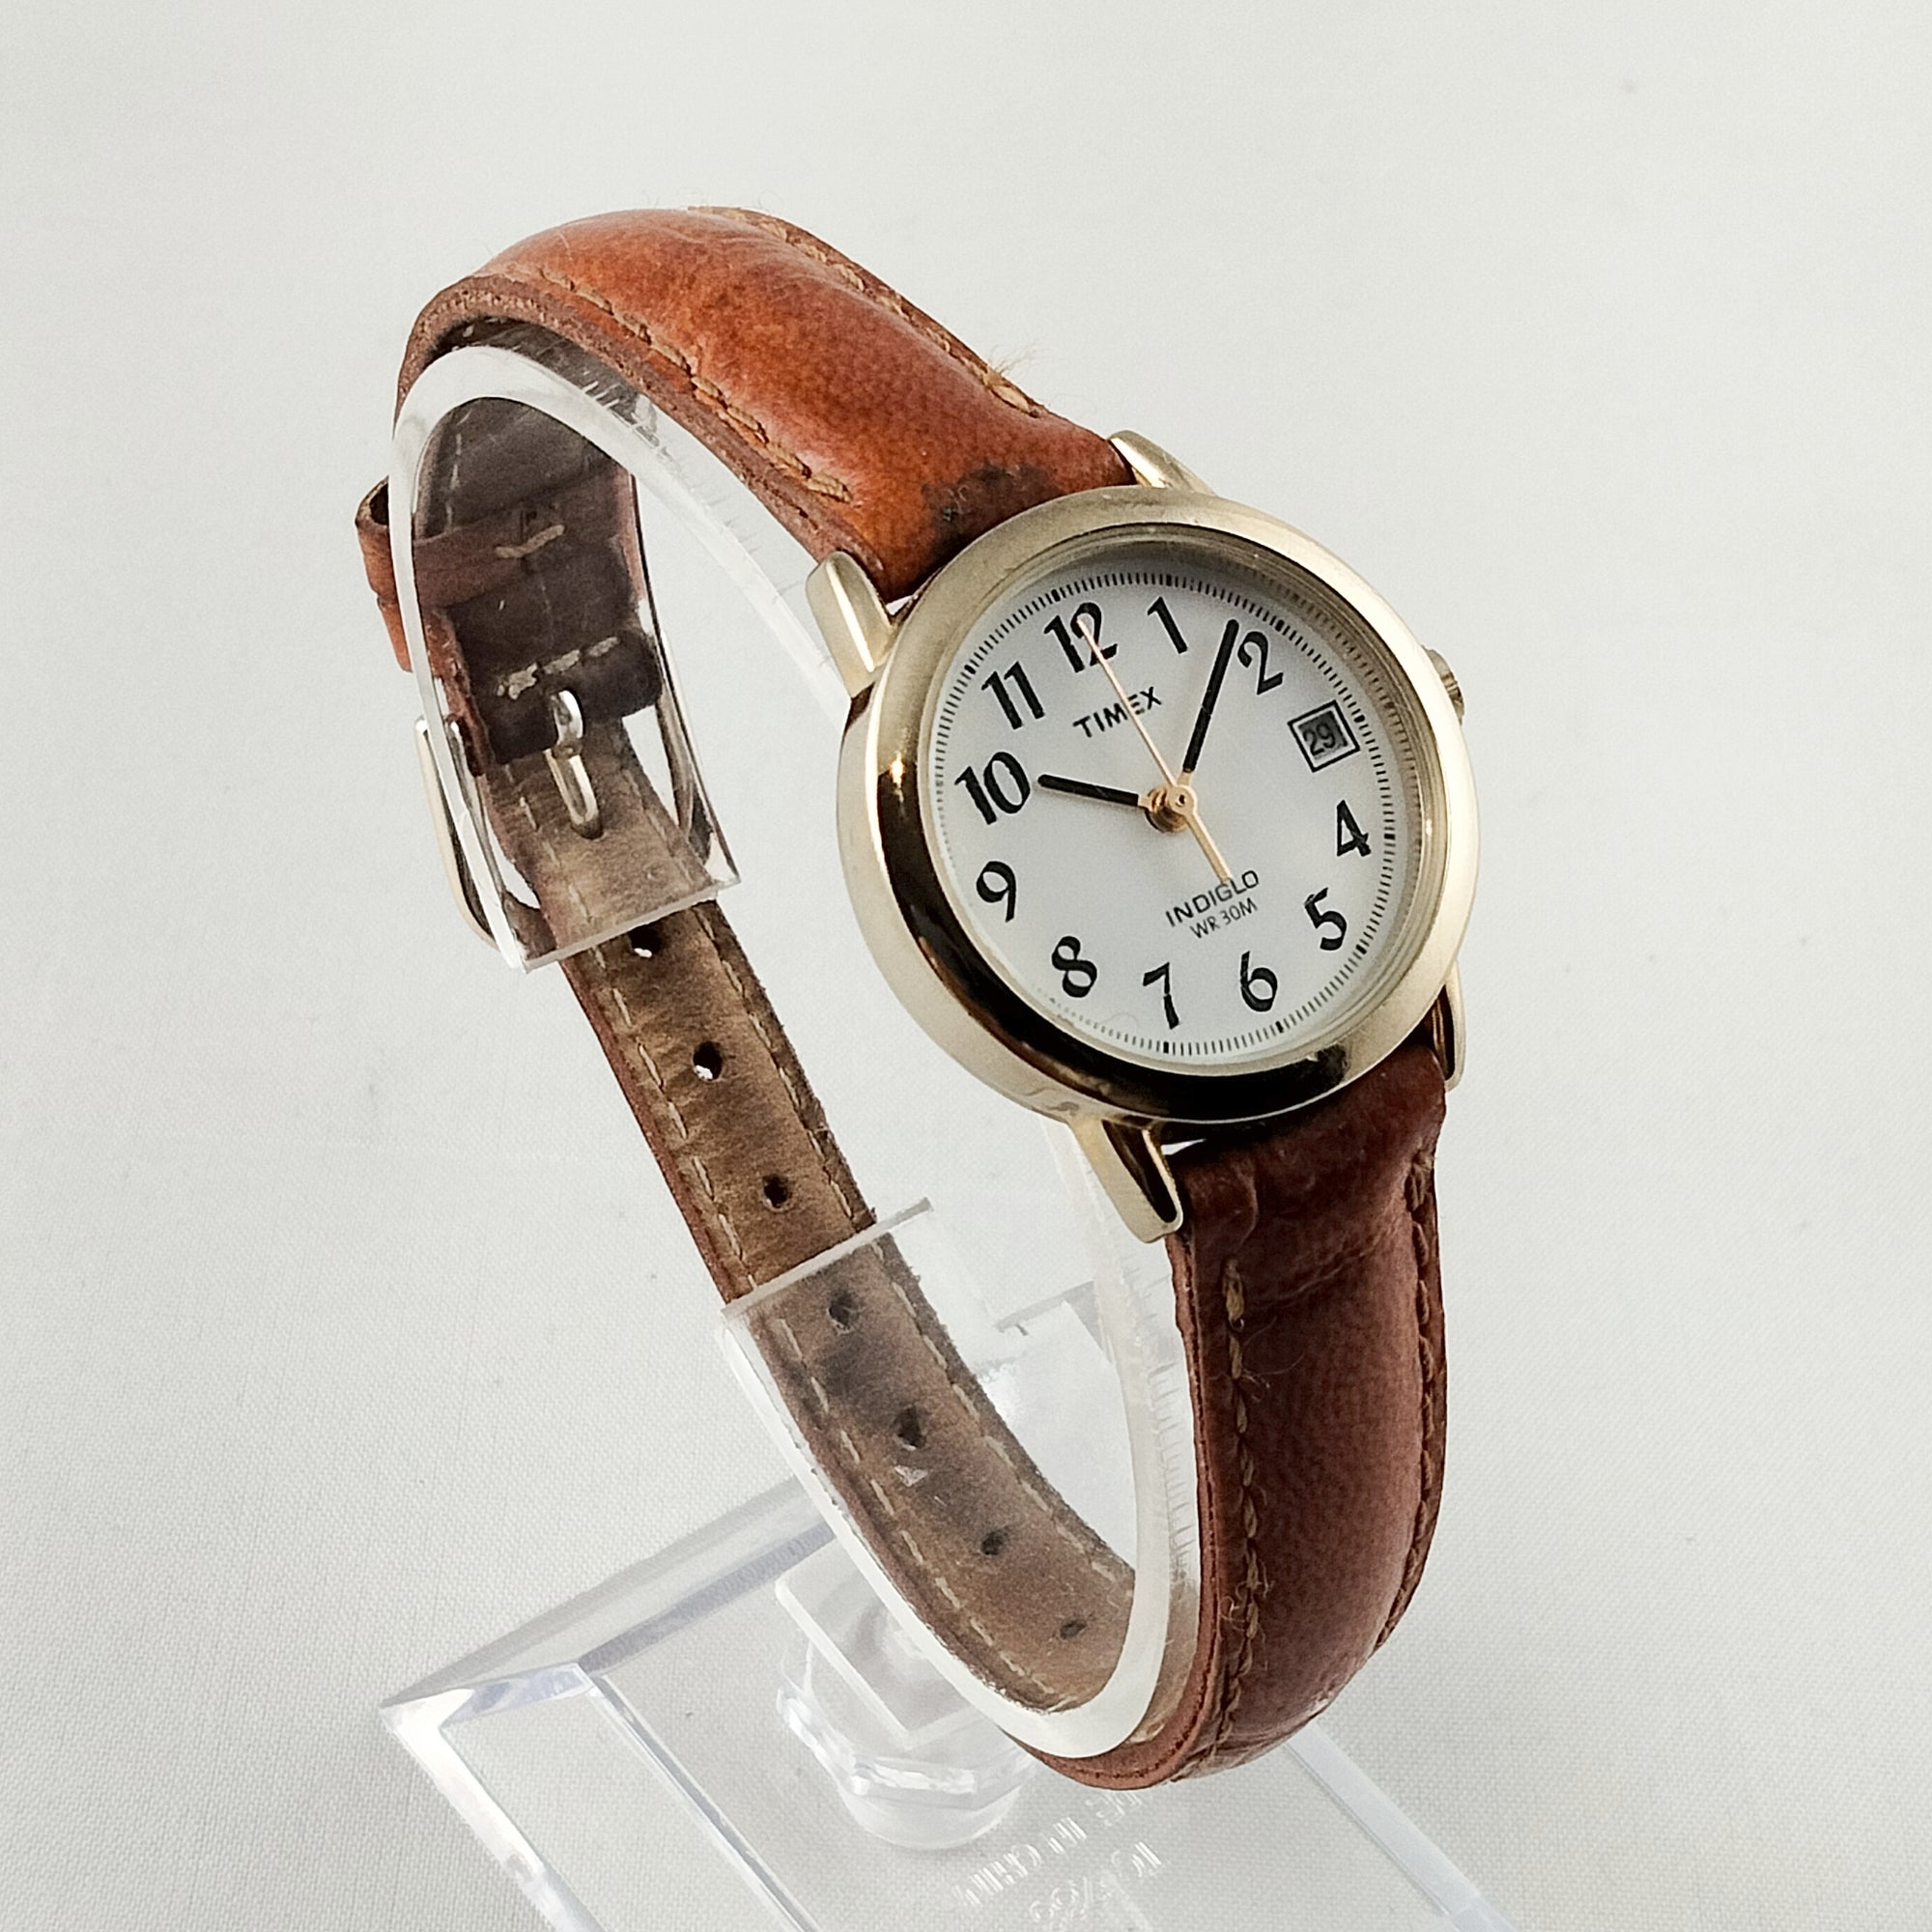 Timex Indiglo Watch, Brown Leather Strap